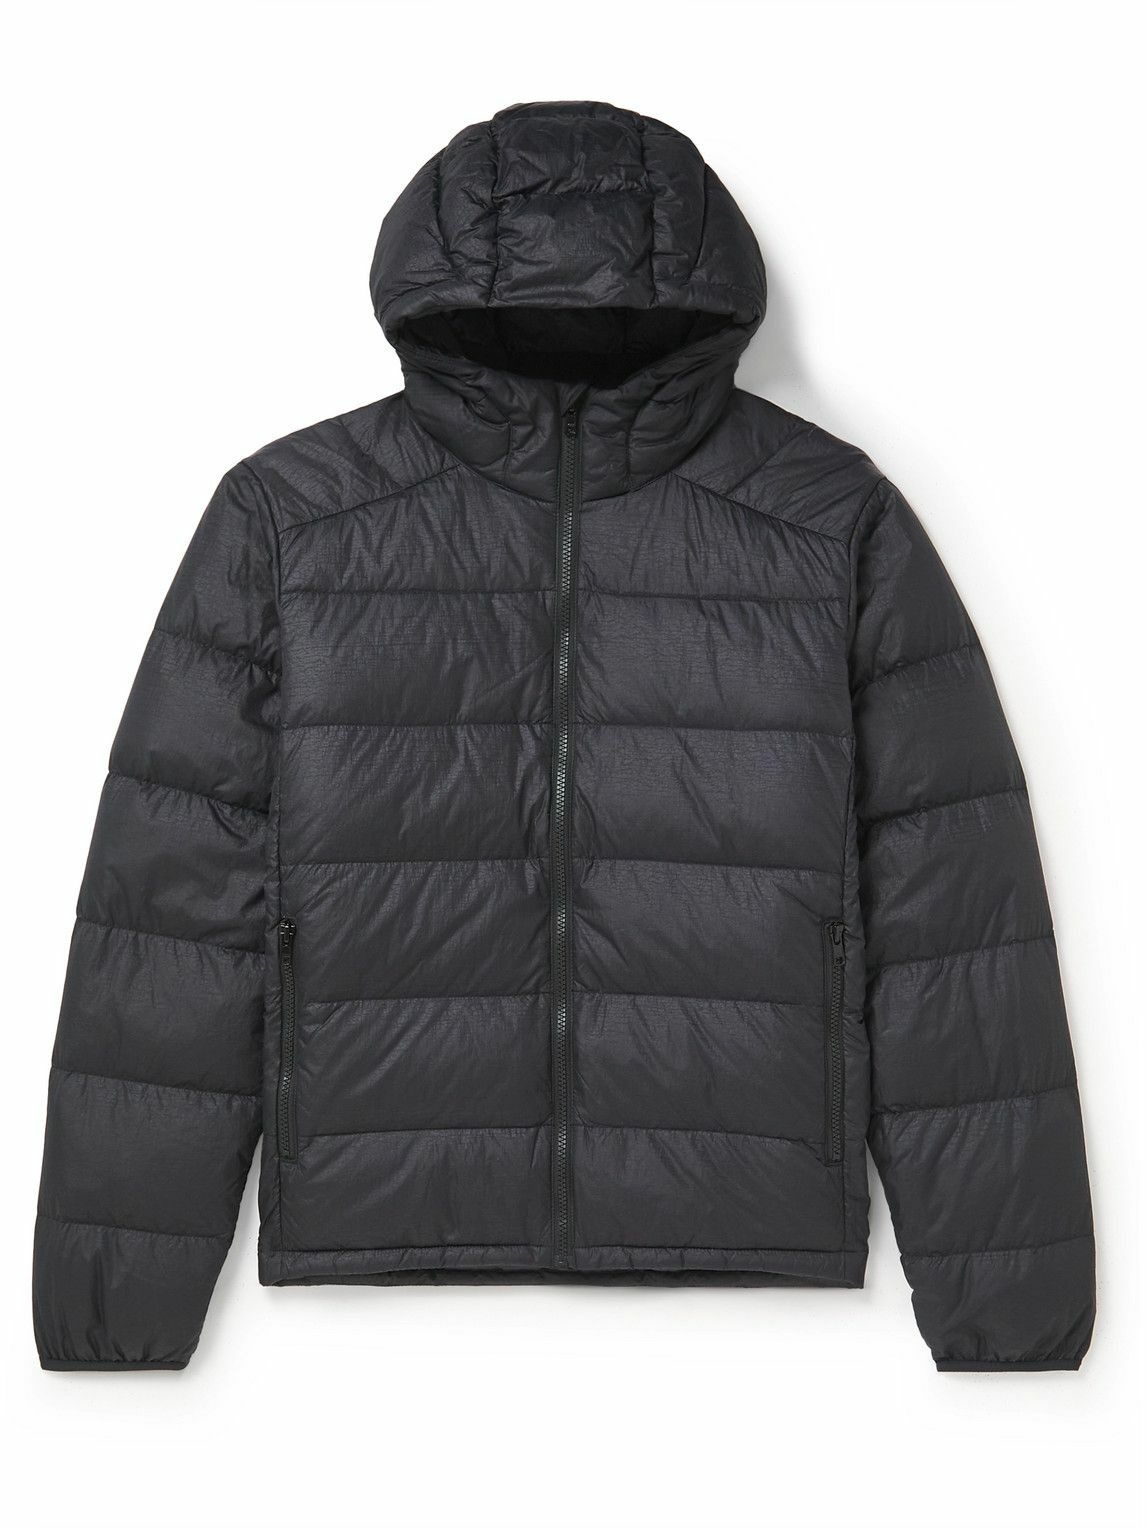 Photo: Outdoor Voices - Quilted SoftShield Down Jacket - Black